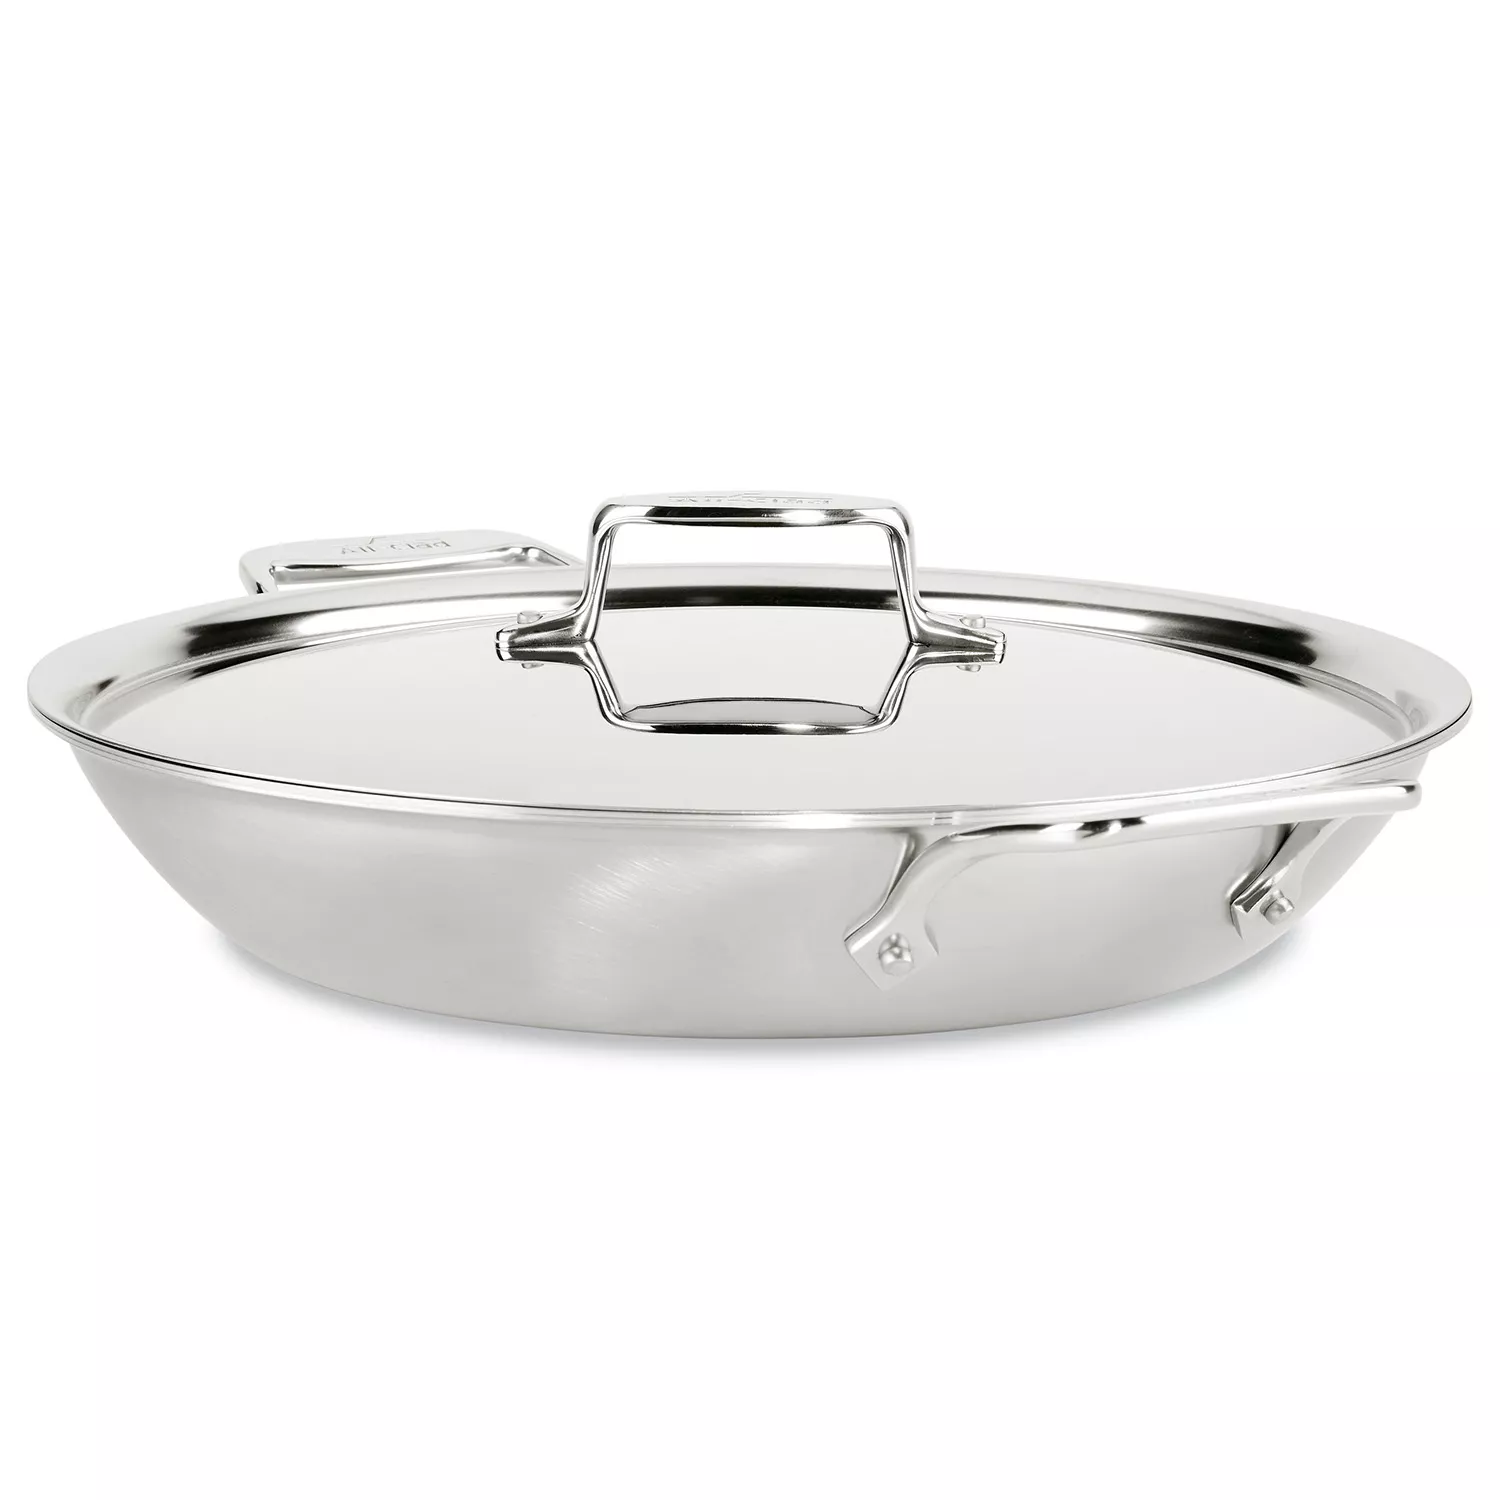 All-Clad Cookware Is On Sale at Sur La Table